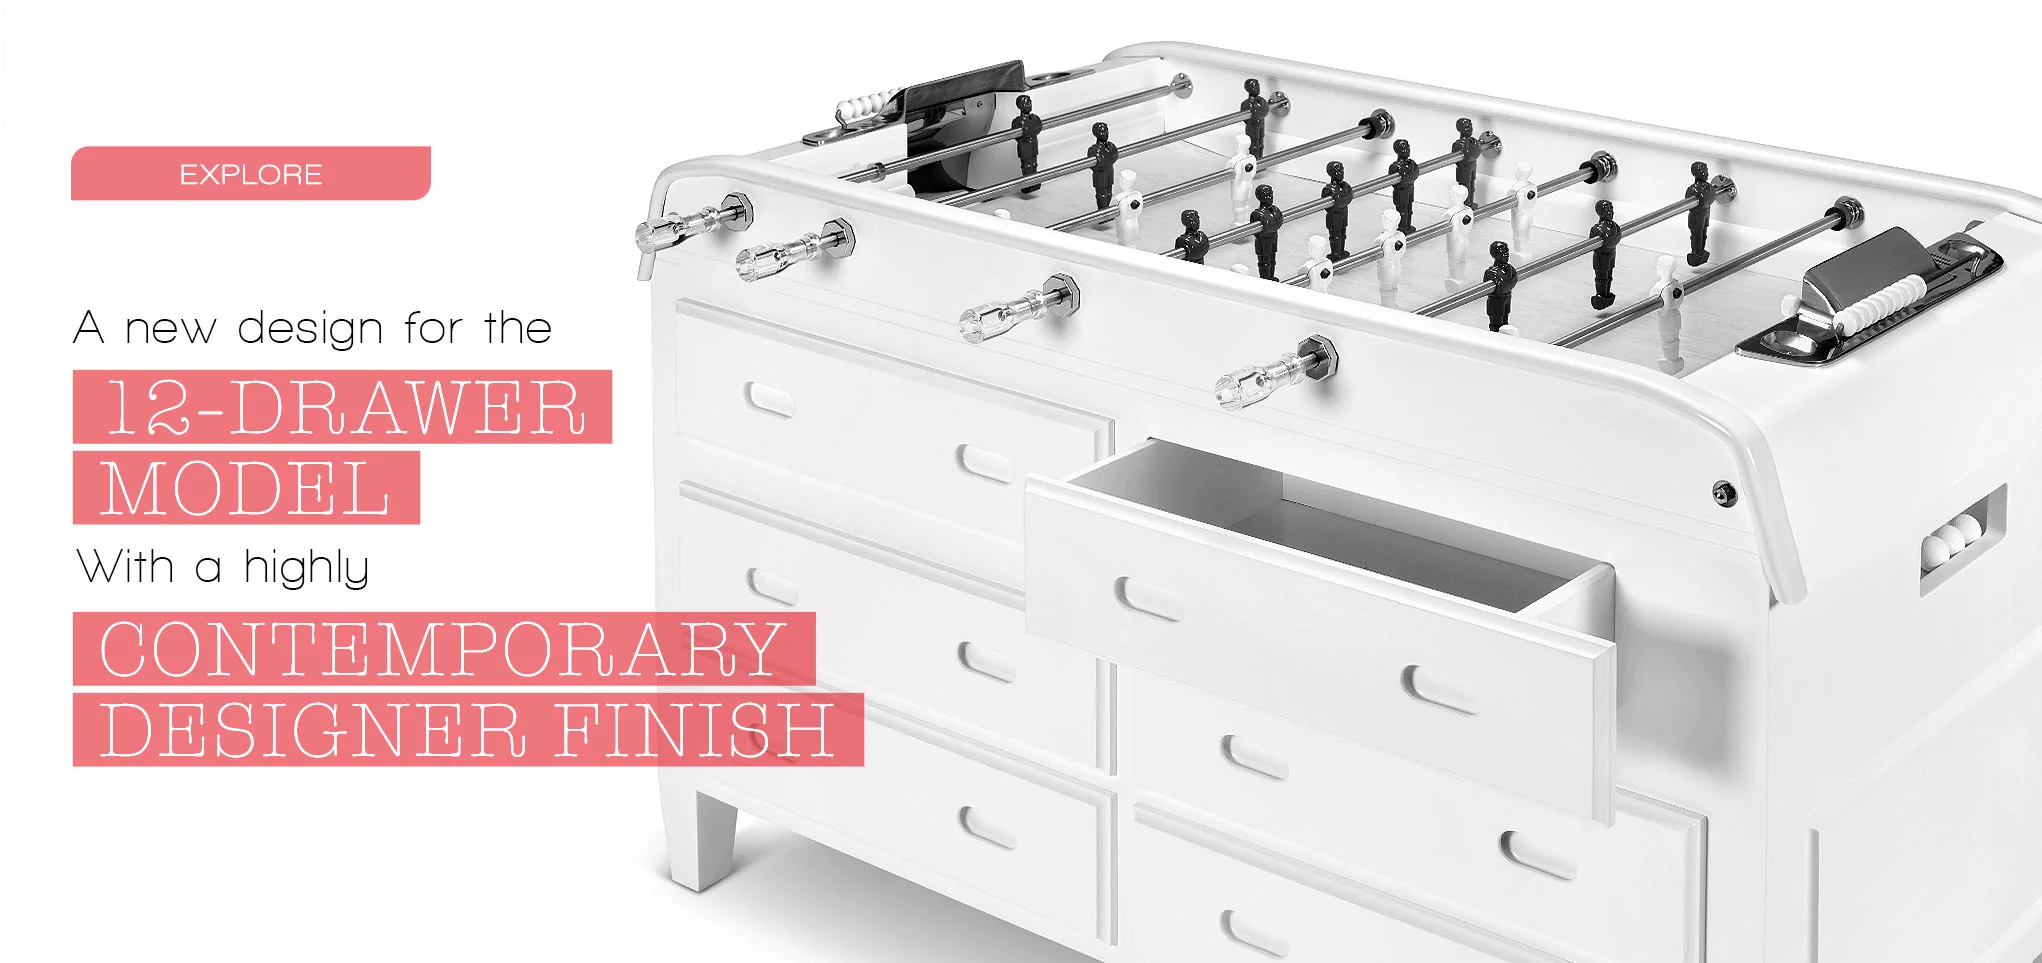 Explore A new design for the 12-drawer model With a Highly Contemporary Designer finish